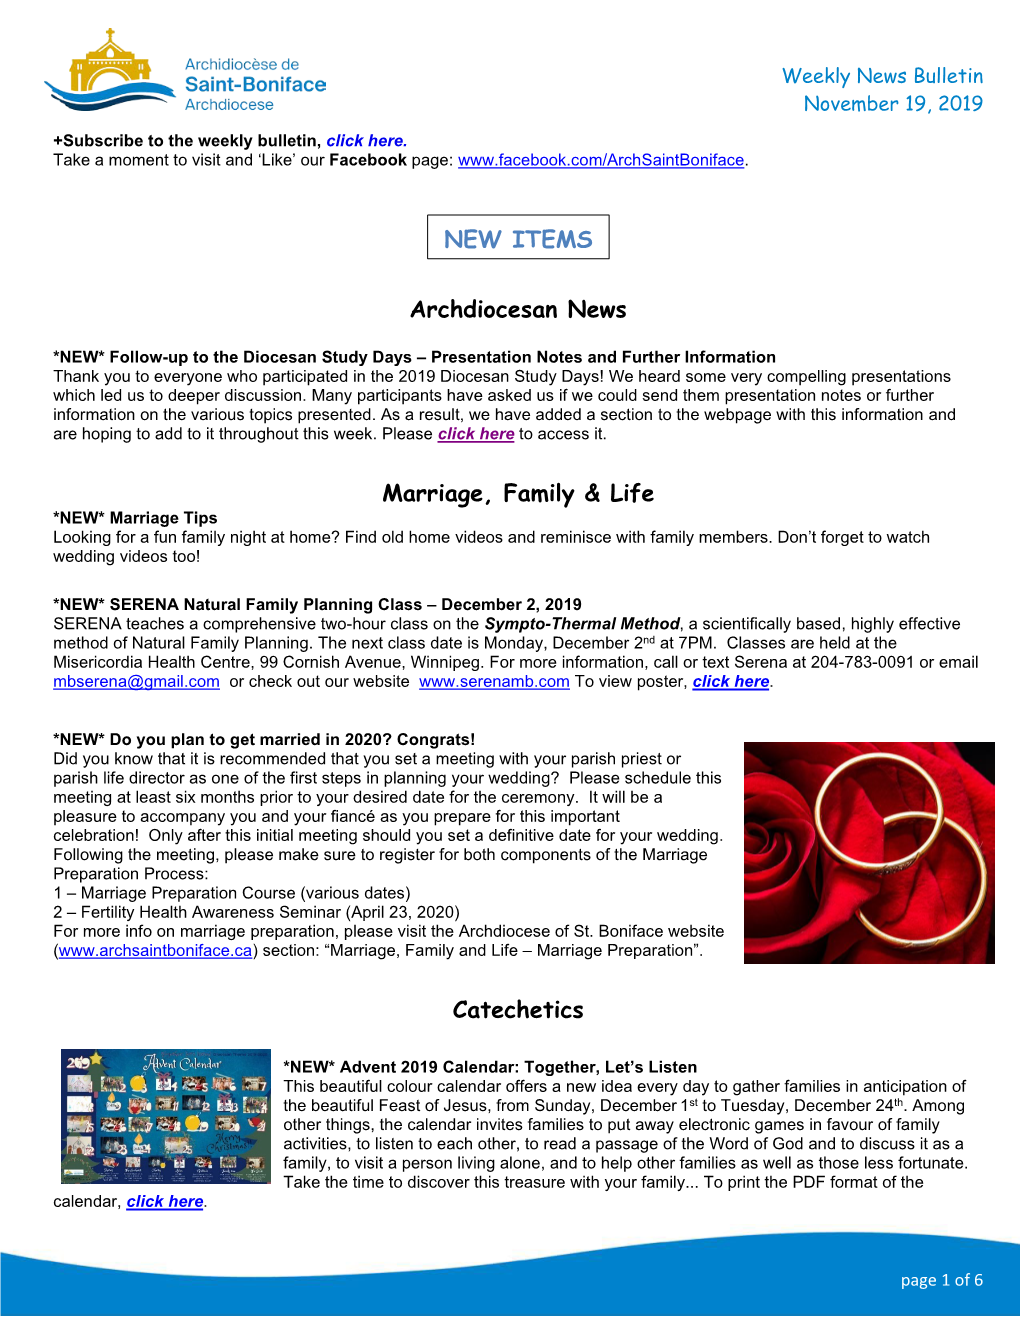 Archdiocesan News Marriage, Family & Life Catechetics NEW ITEMS